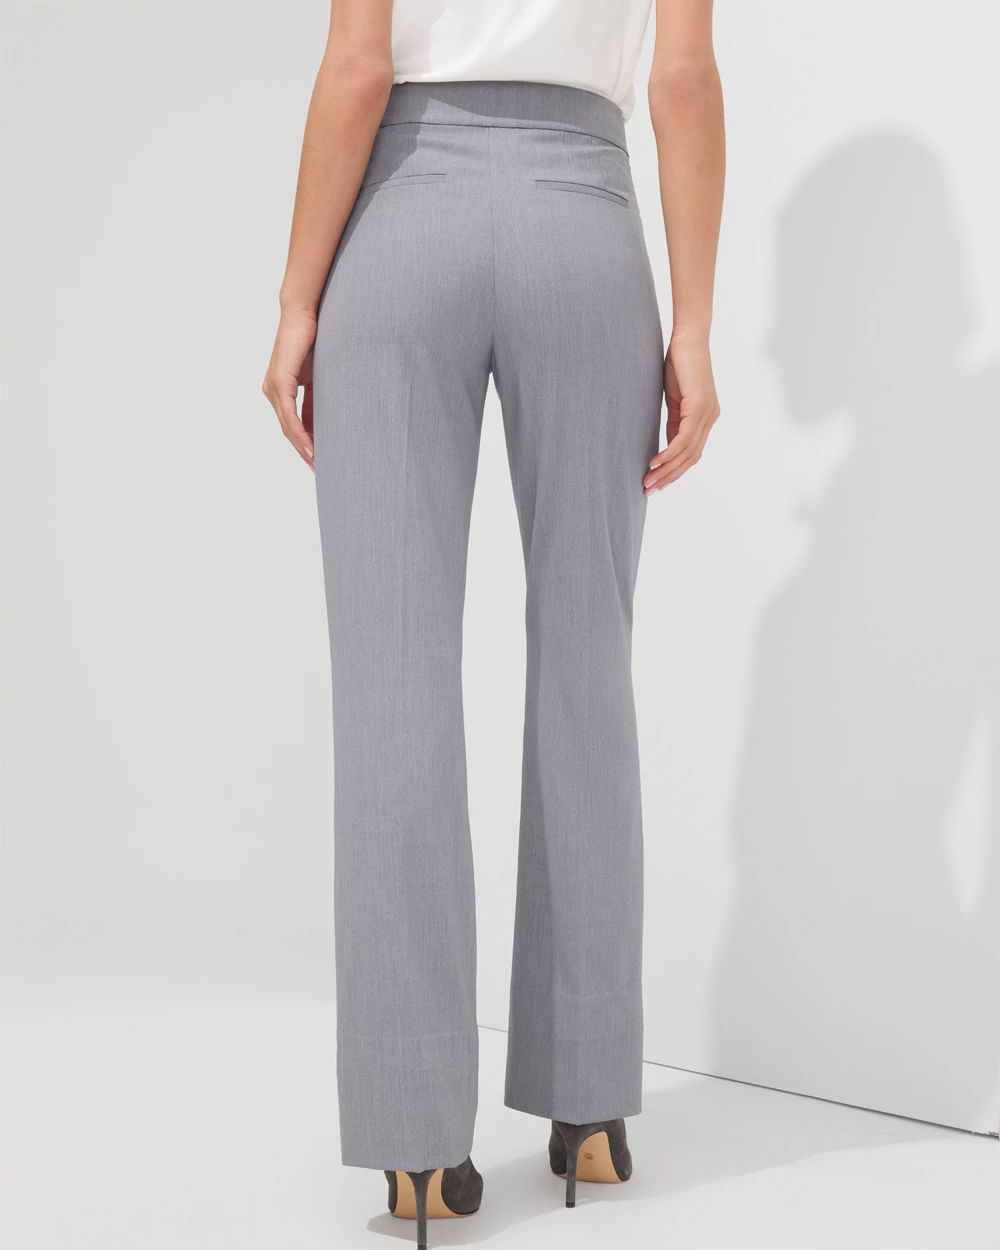 Outlet WHBM Seasonless Slim Bootcut Pants click to view larger image.